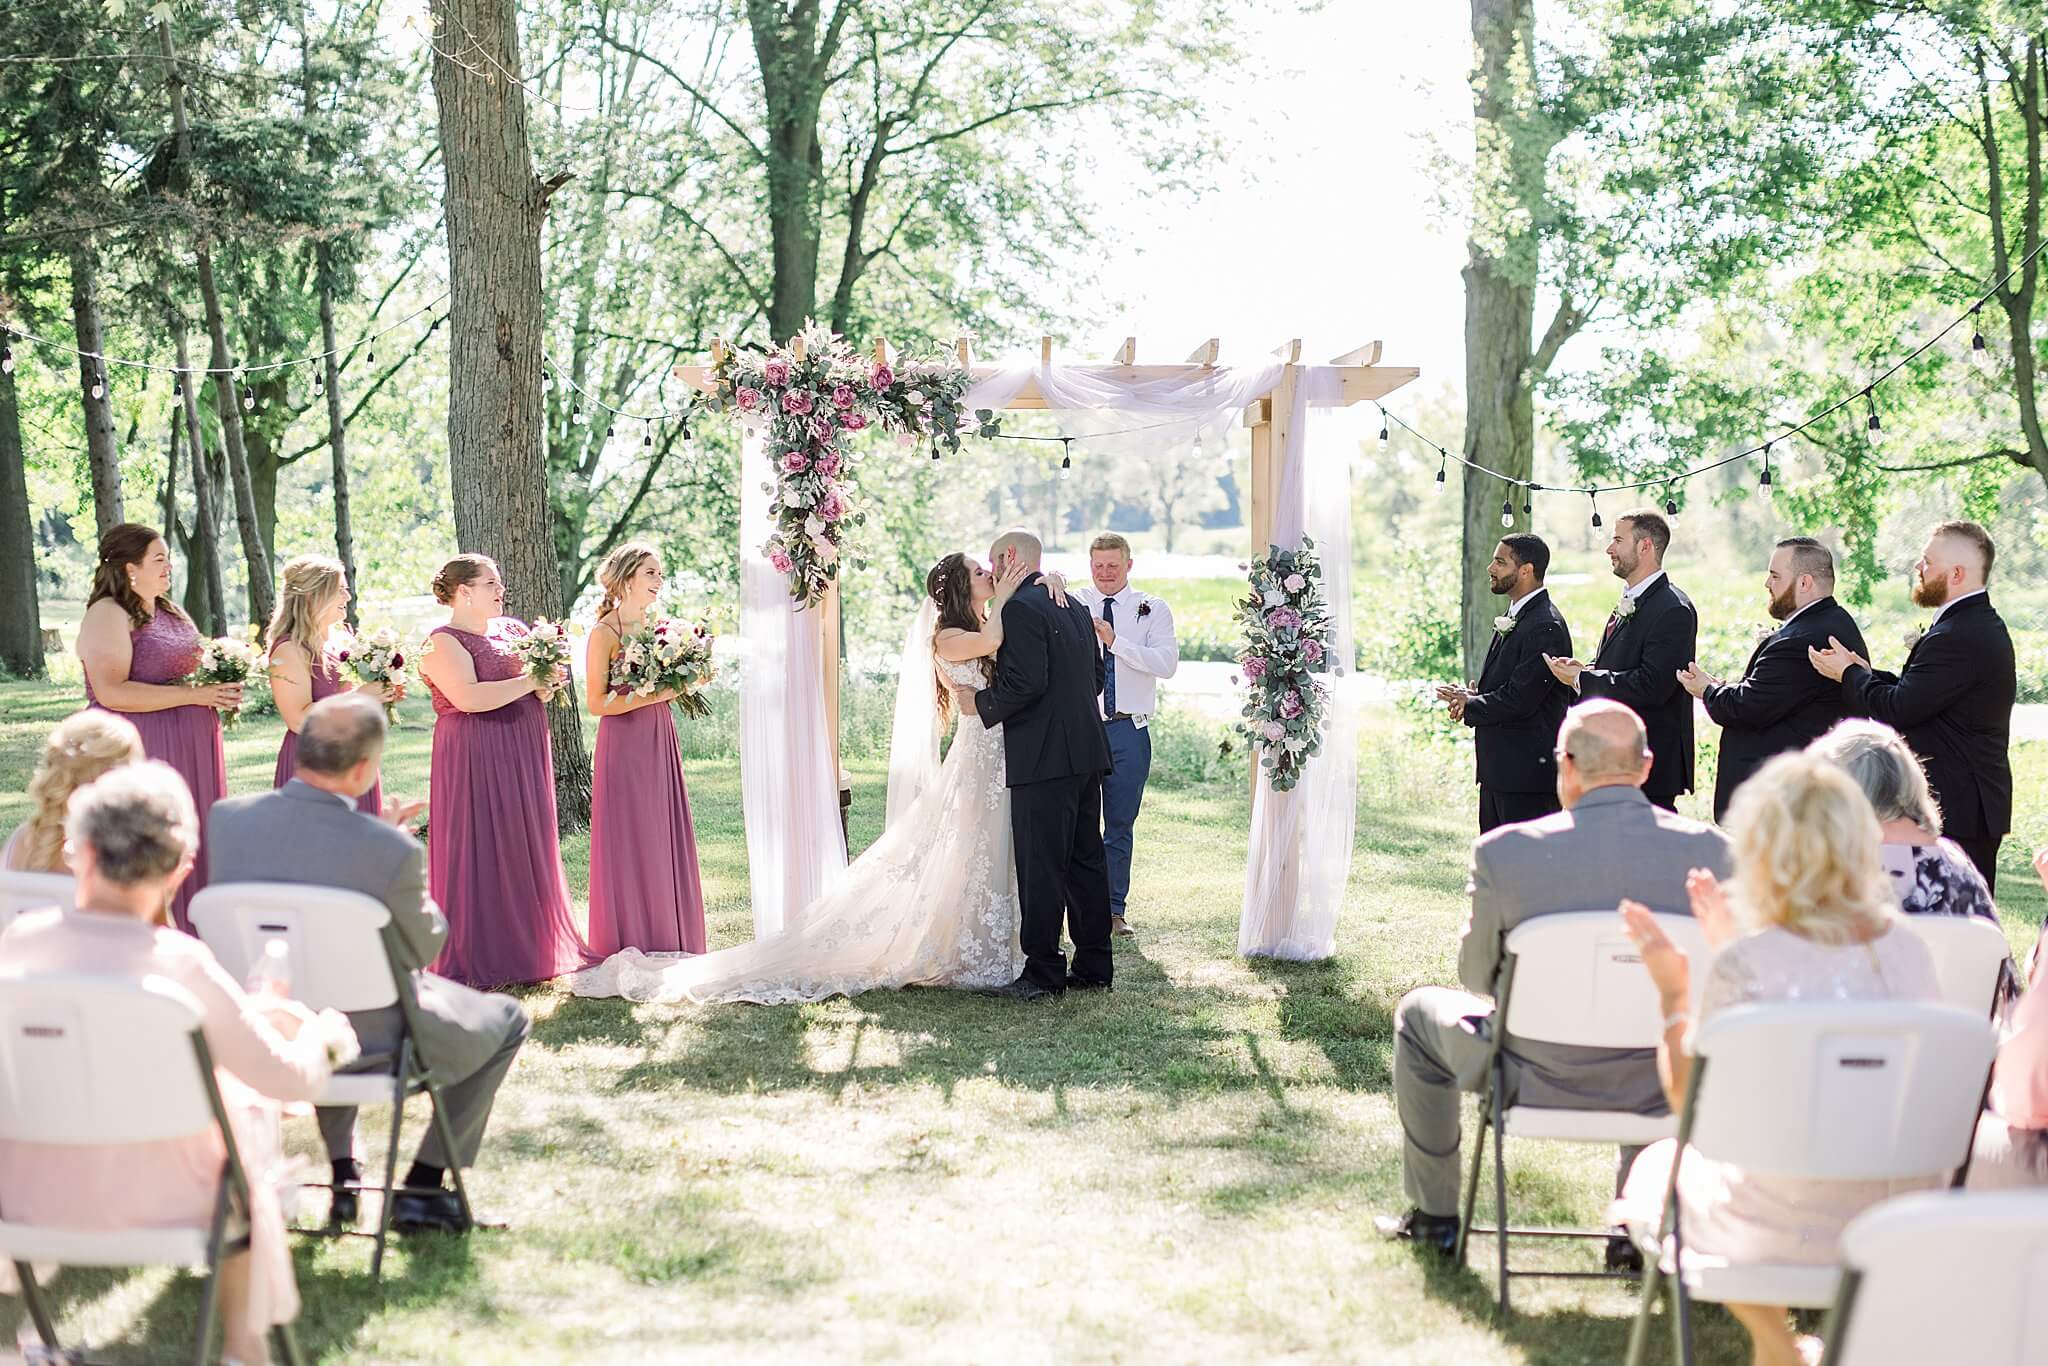 Bride and groom share first kiss during Michigan Summer Backyard Wedding ceremony.